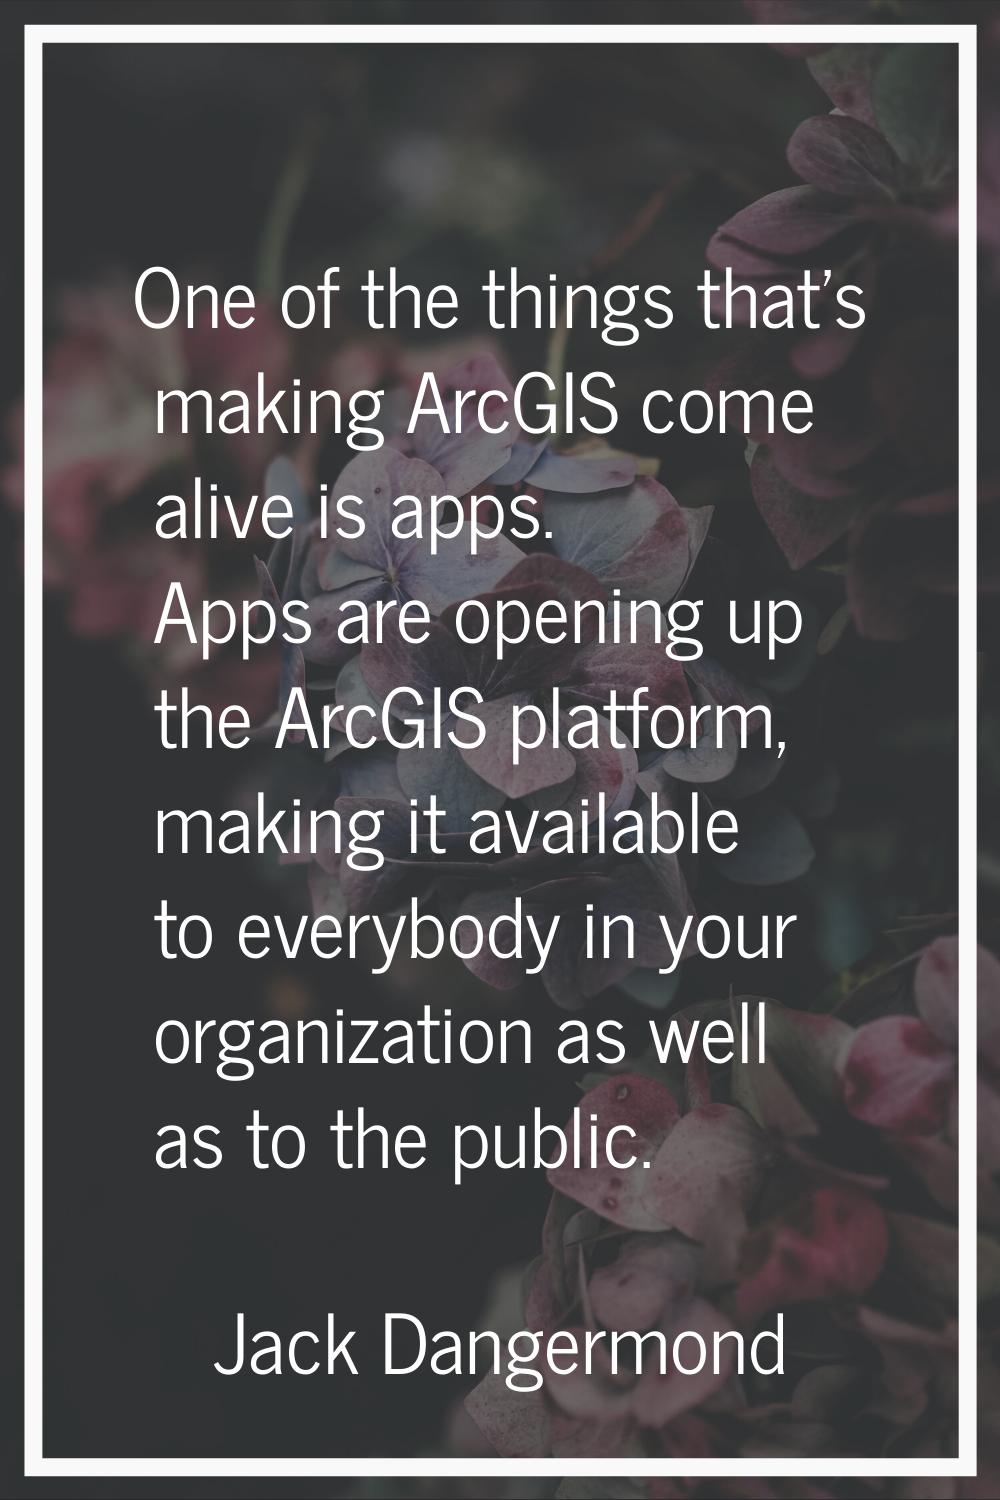 One of the things that's making ArcGIS come alive is apps. Apps are opening up the ArcGIS platform,